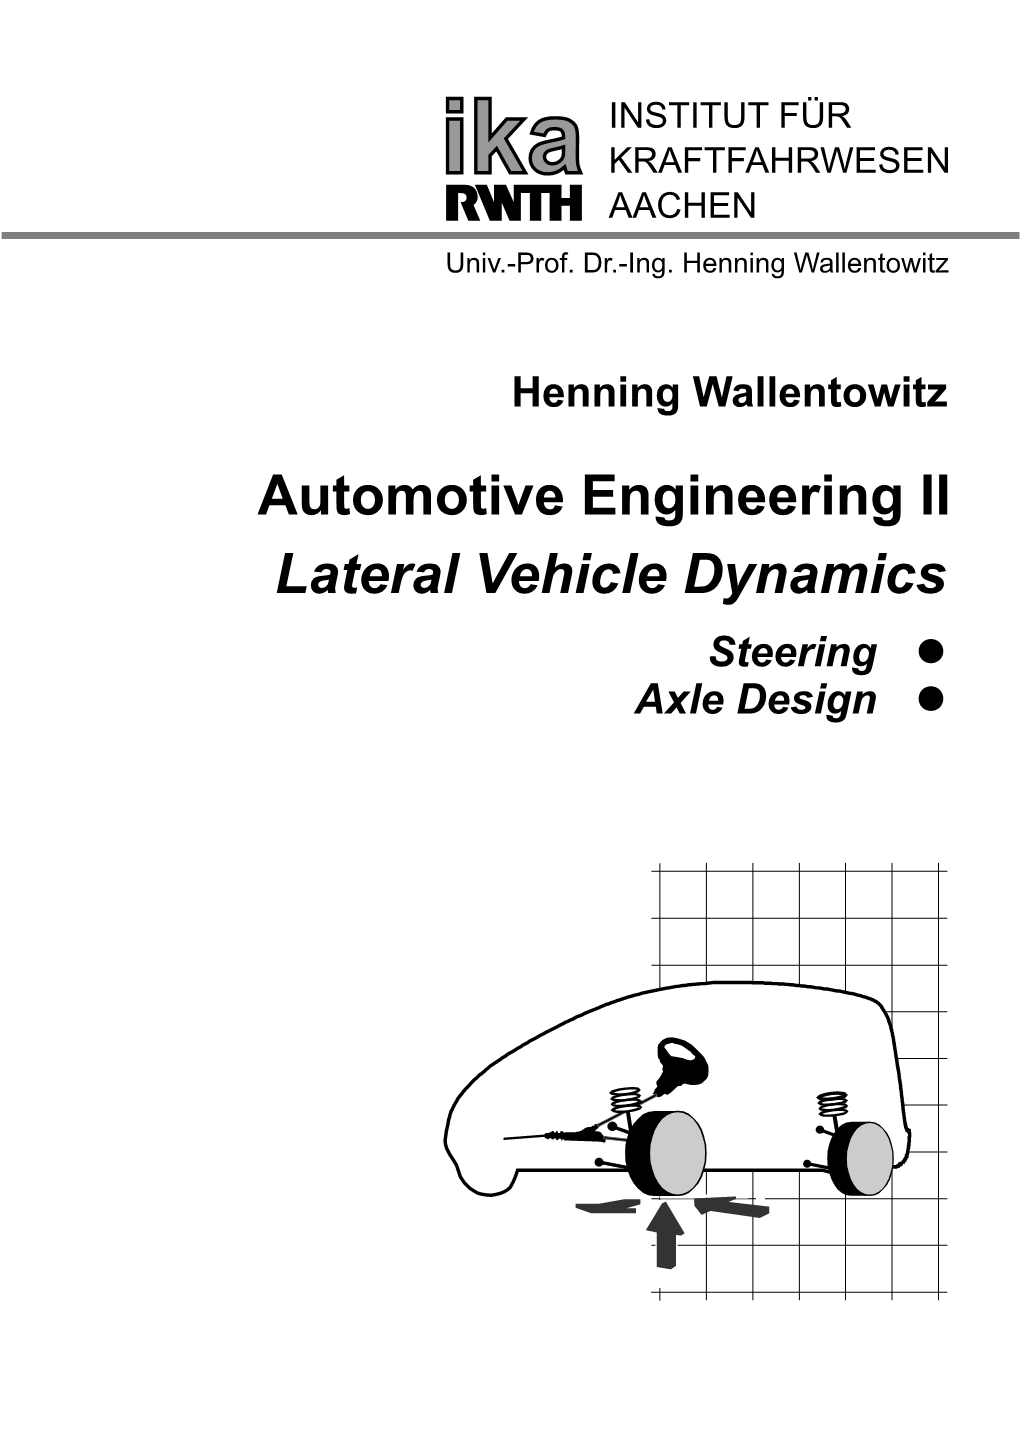 Automotive Engineering II Lateral Vehicle Dynamics